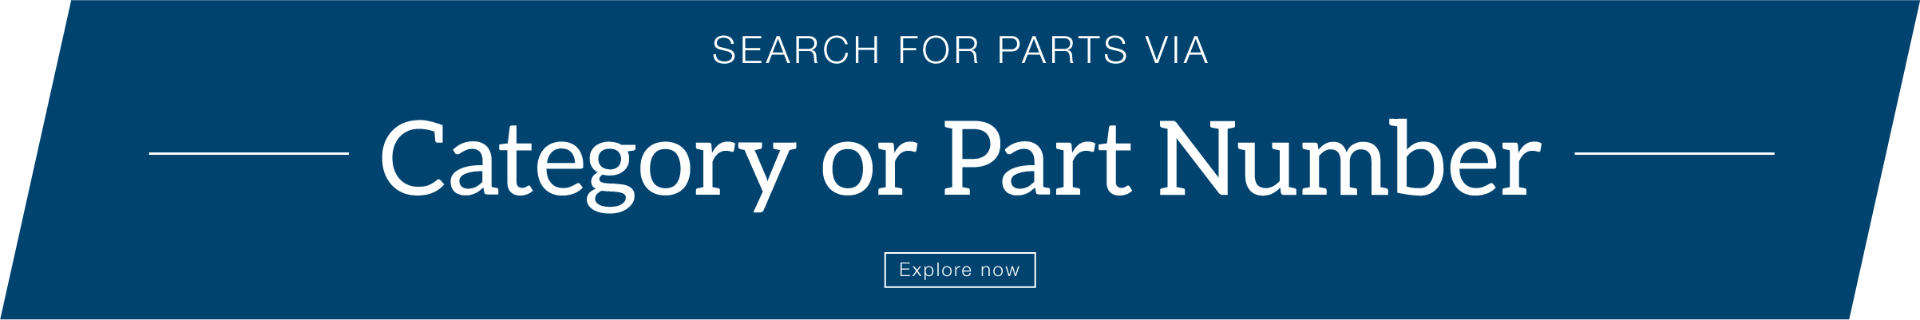 Search for parts by category or part number